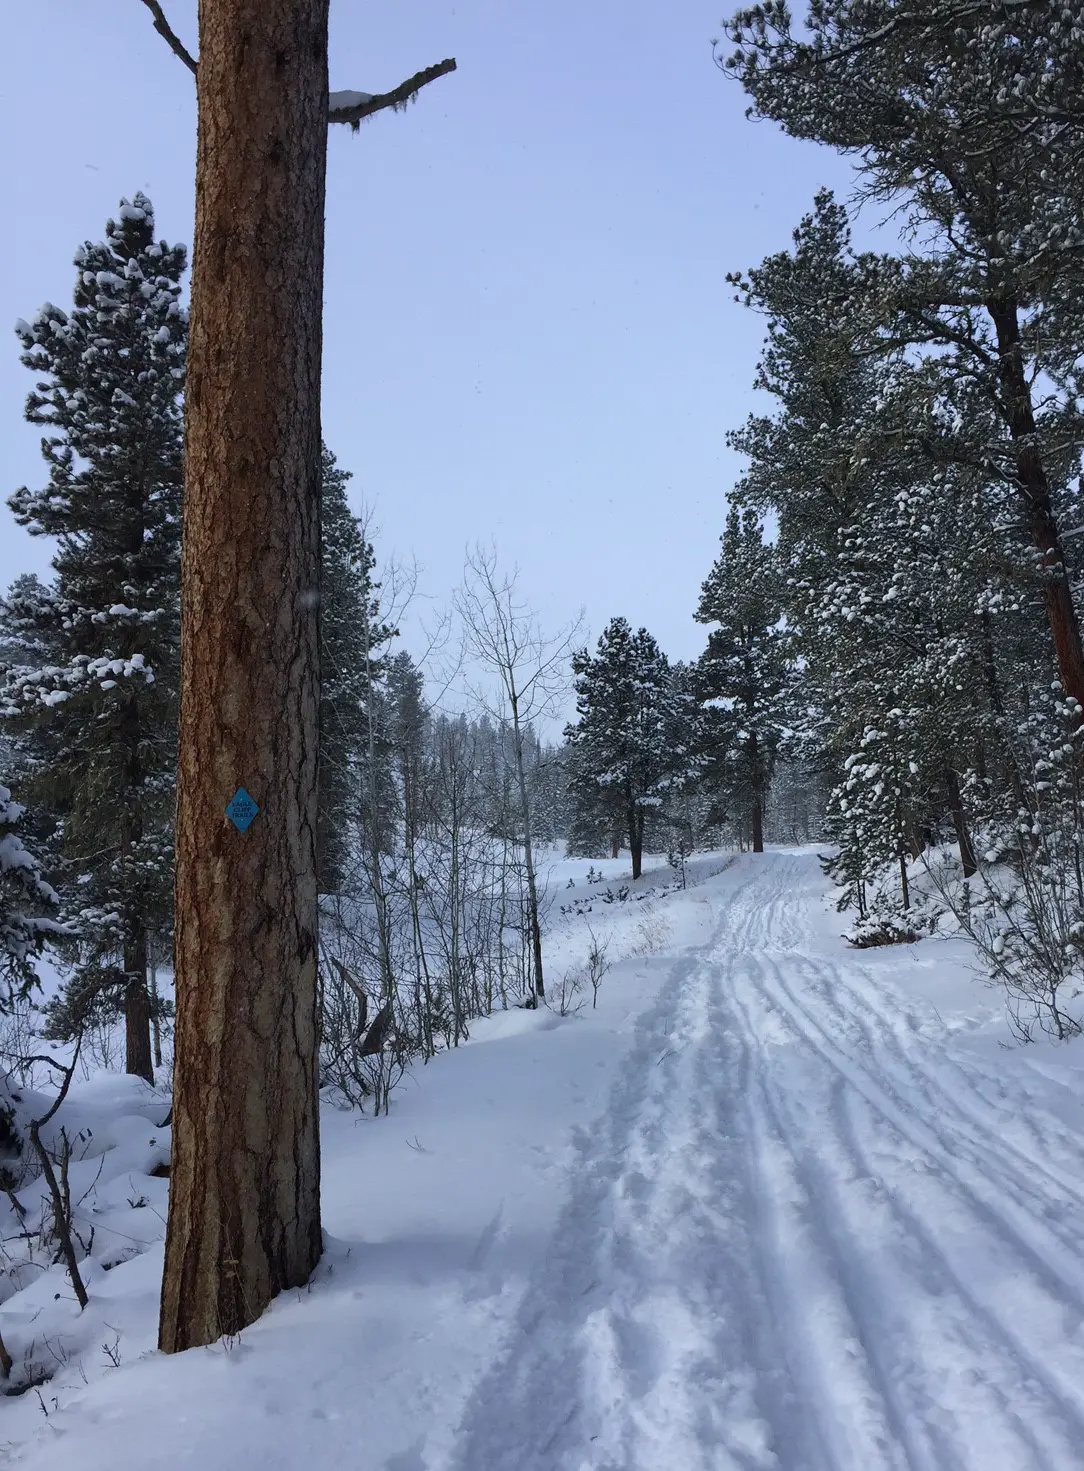 Ski tracks down a snow-covered forest road. Pine trees line both sides